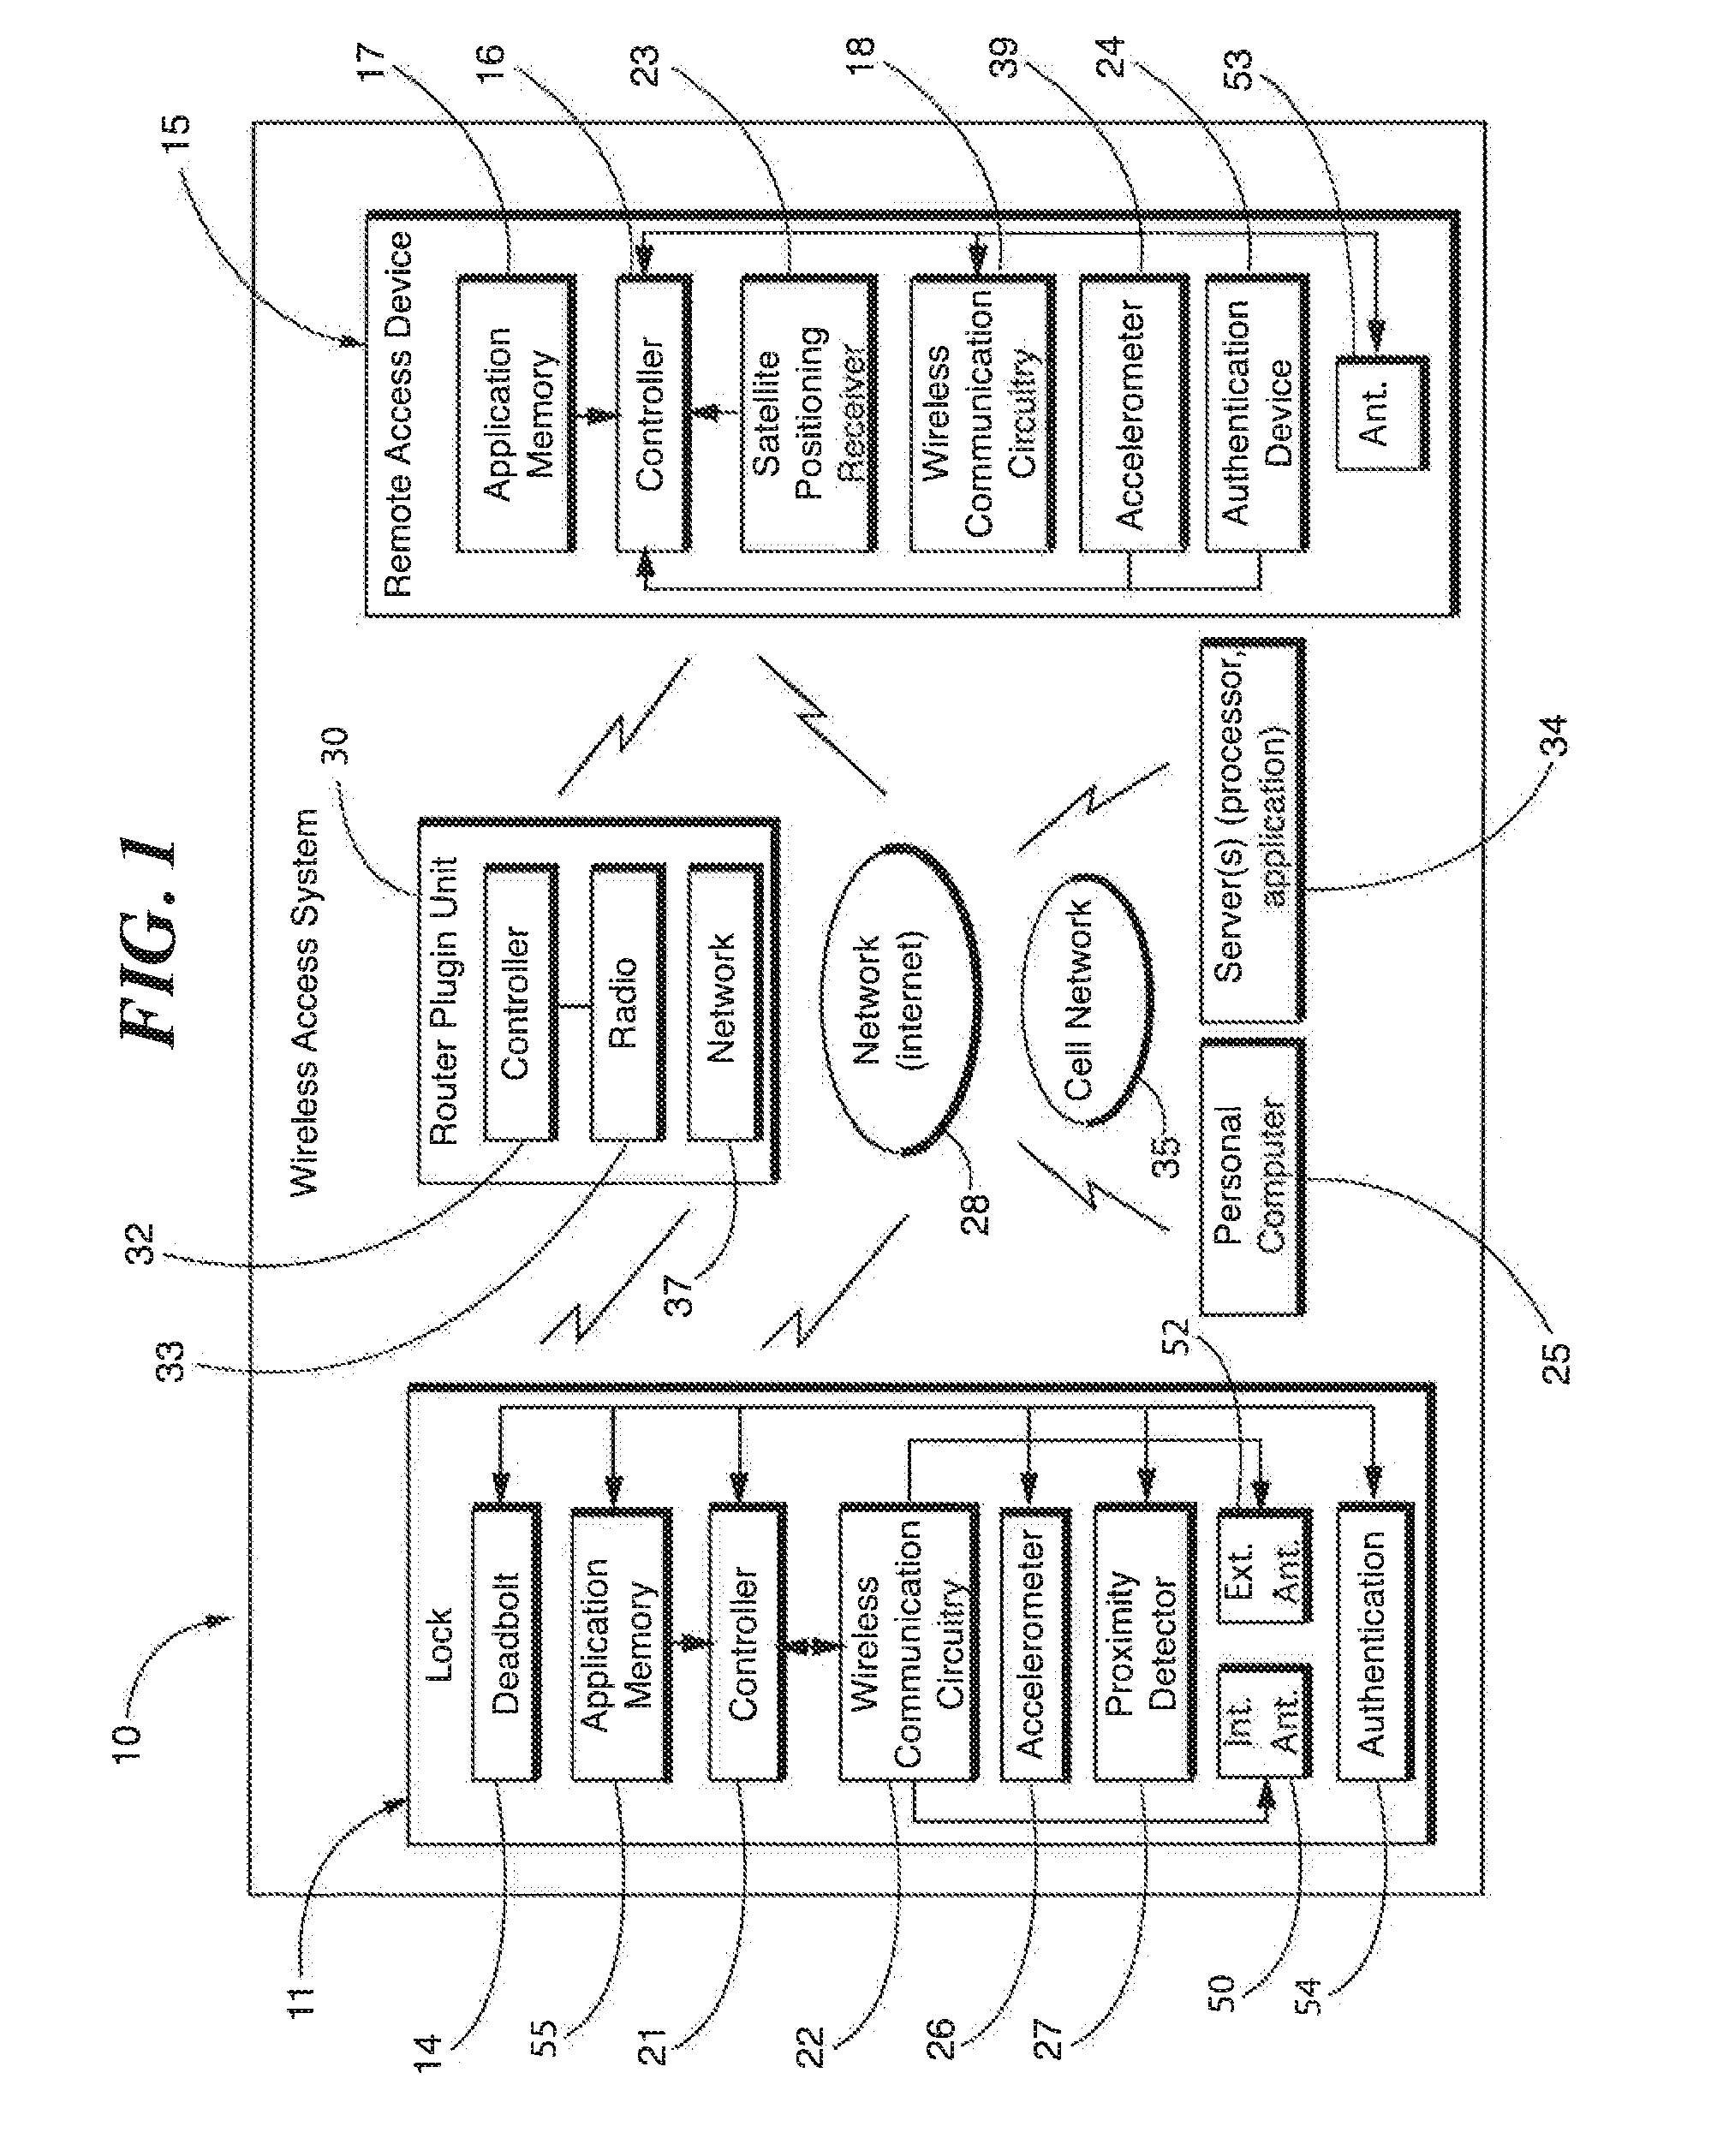 Wireless access control system and related methods